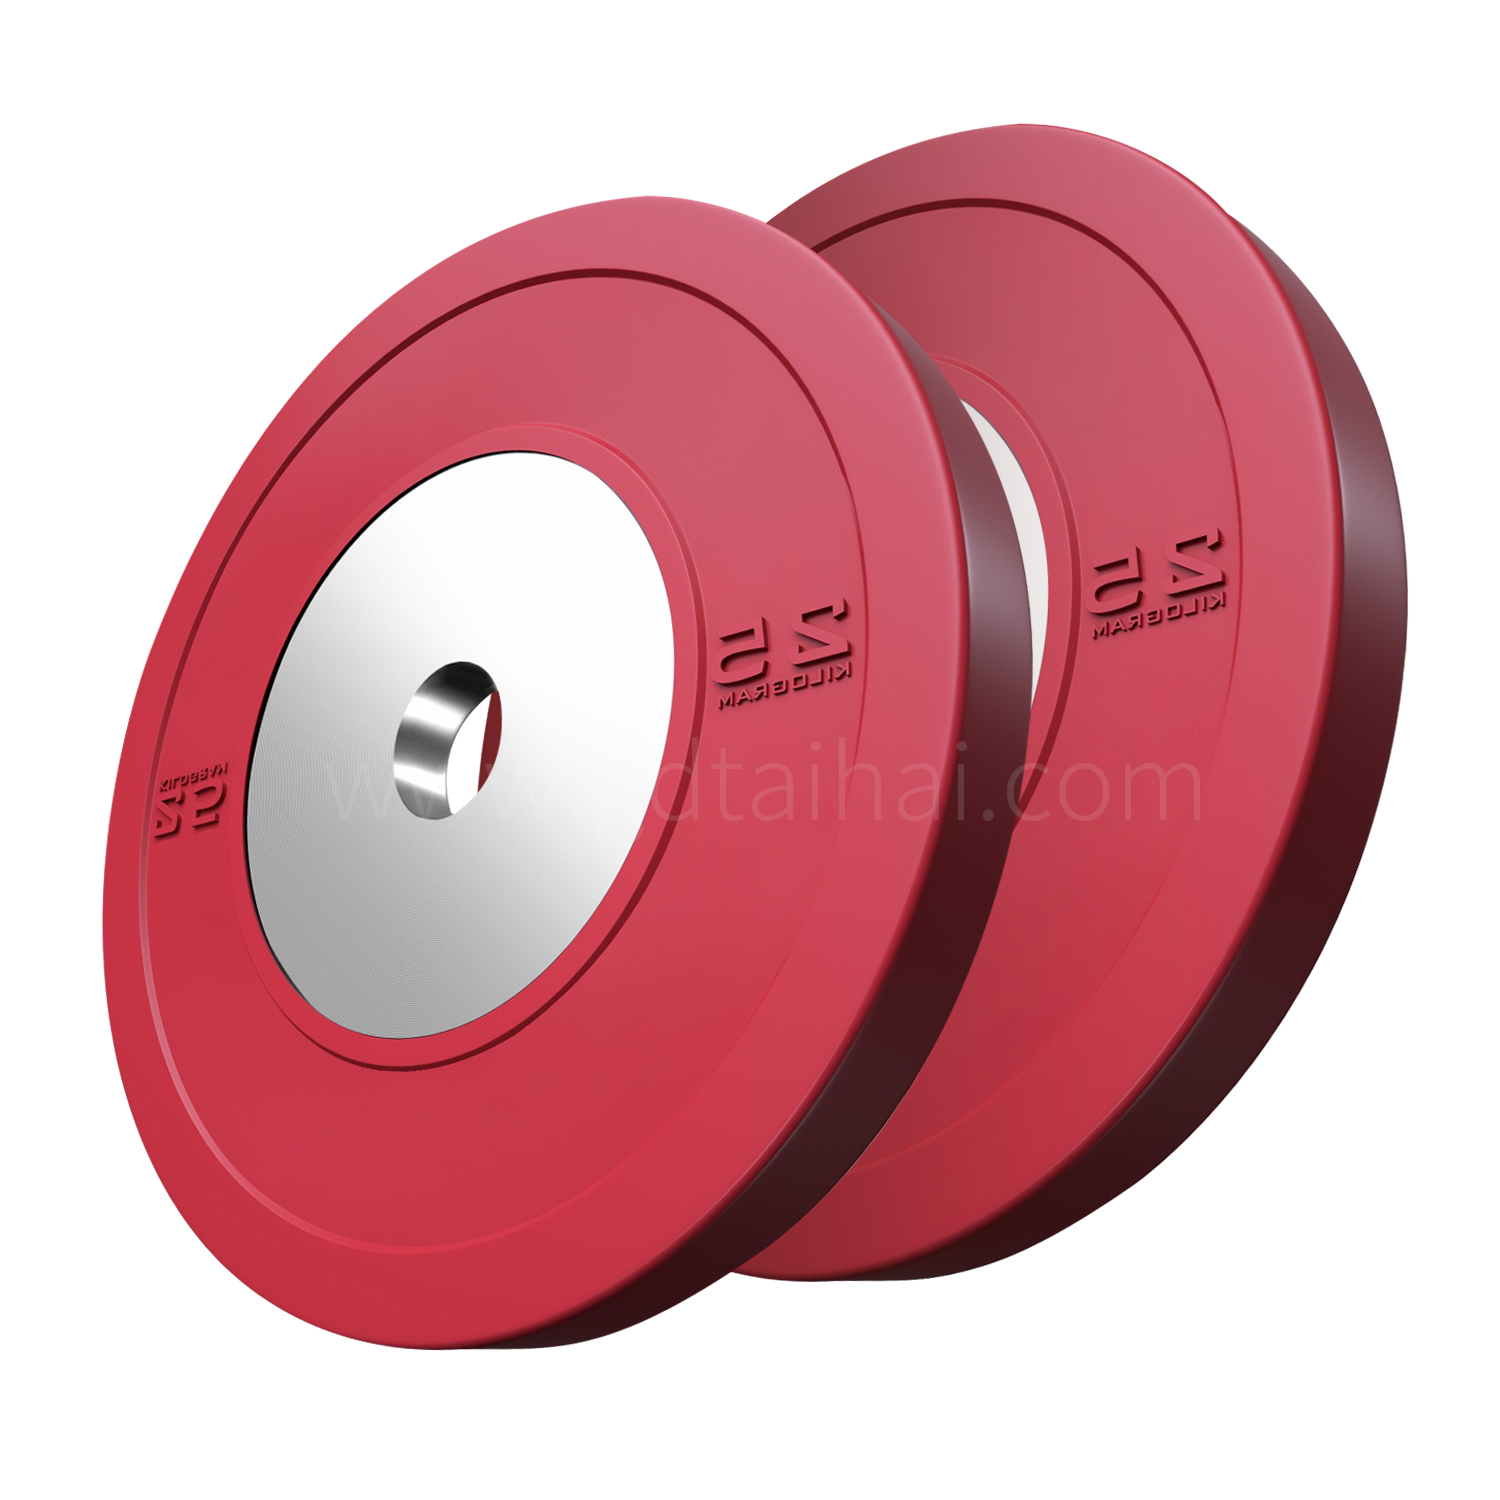 TaiHai Custom fitness power training gym competition rubber color bumper barbell weight lifting plates